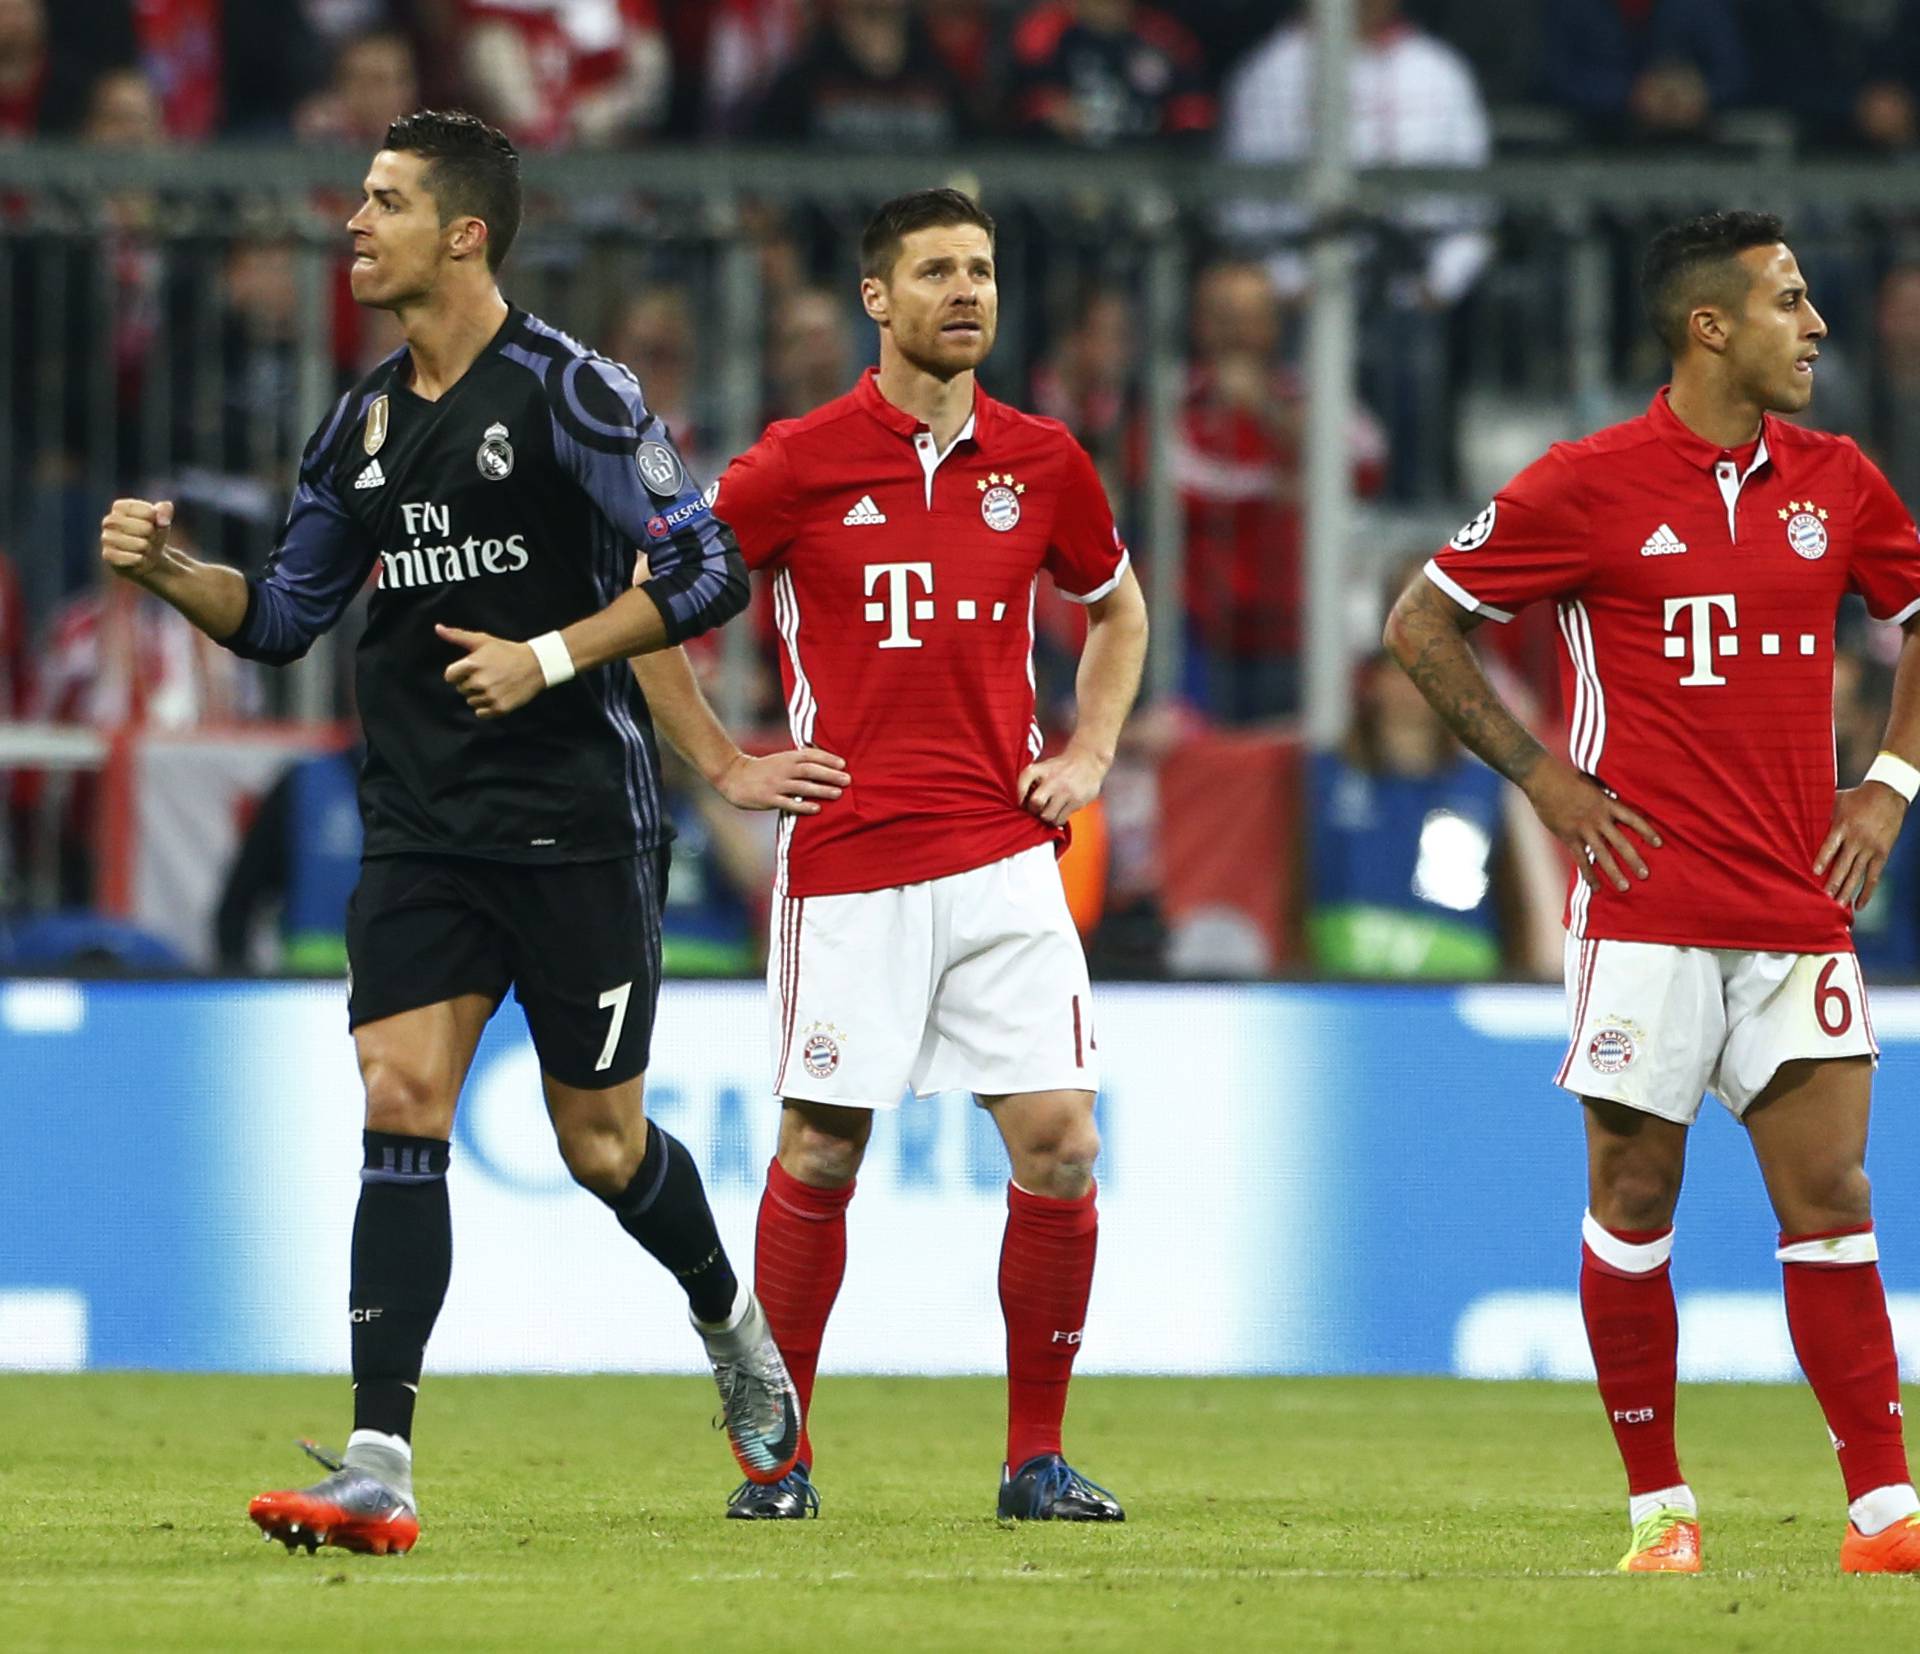 Real Madrid's Cristiano Ronaldo celebrates scoring their first goal as Bayern Munich's Xabi Alonso and Thiago Alcantara look dejected